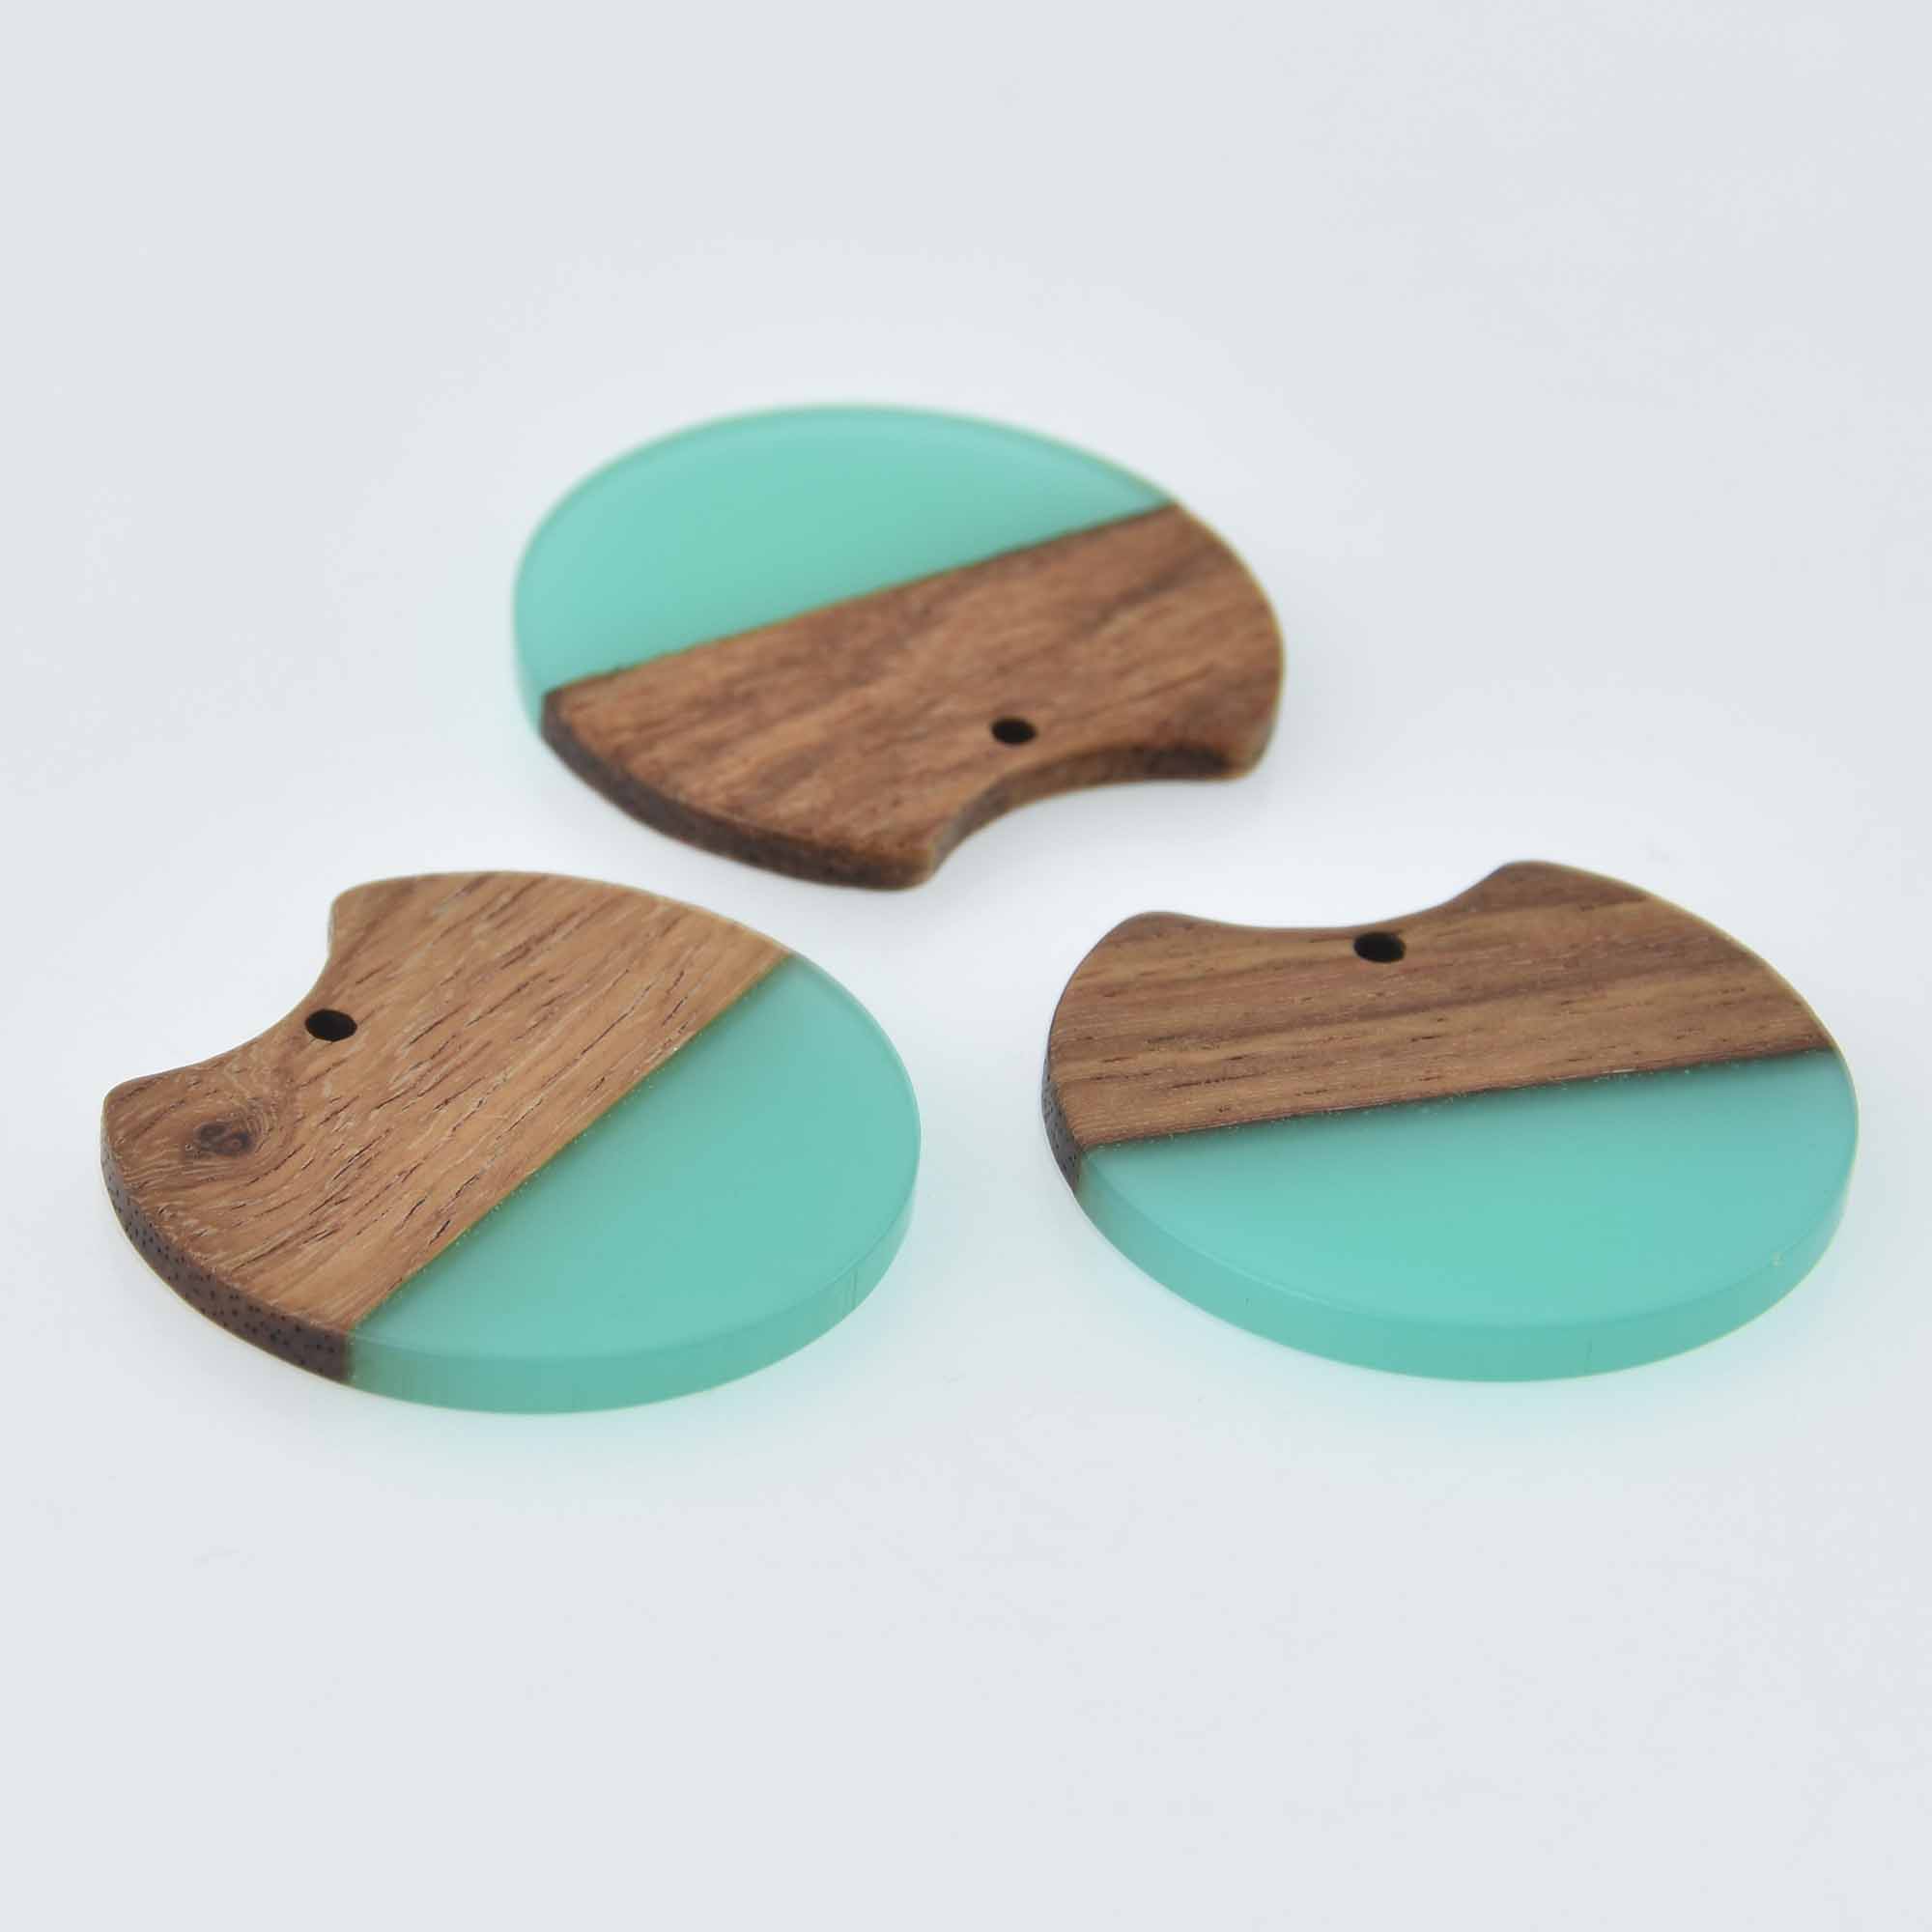 2 Round Moon Charms, Teal Resin and Real Wood, 1.5